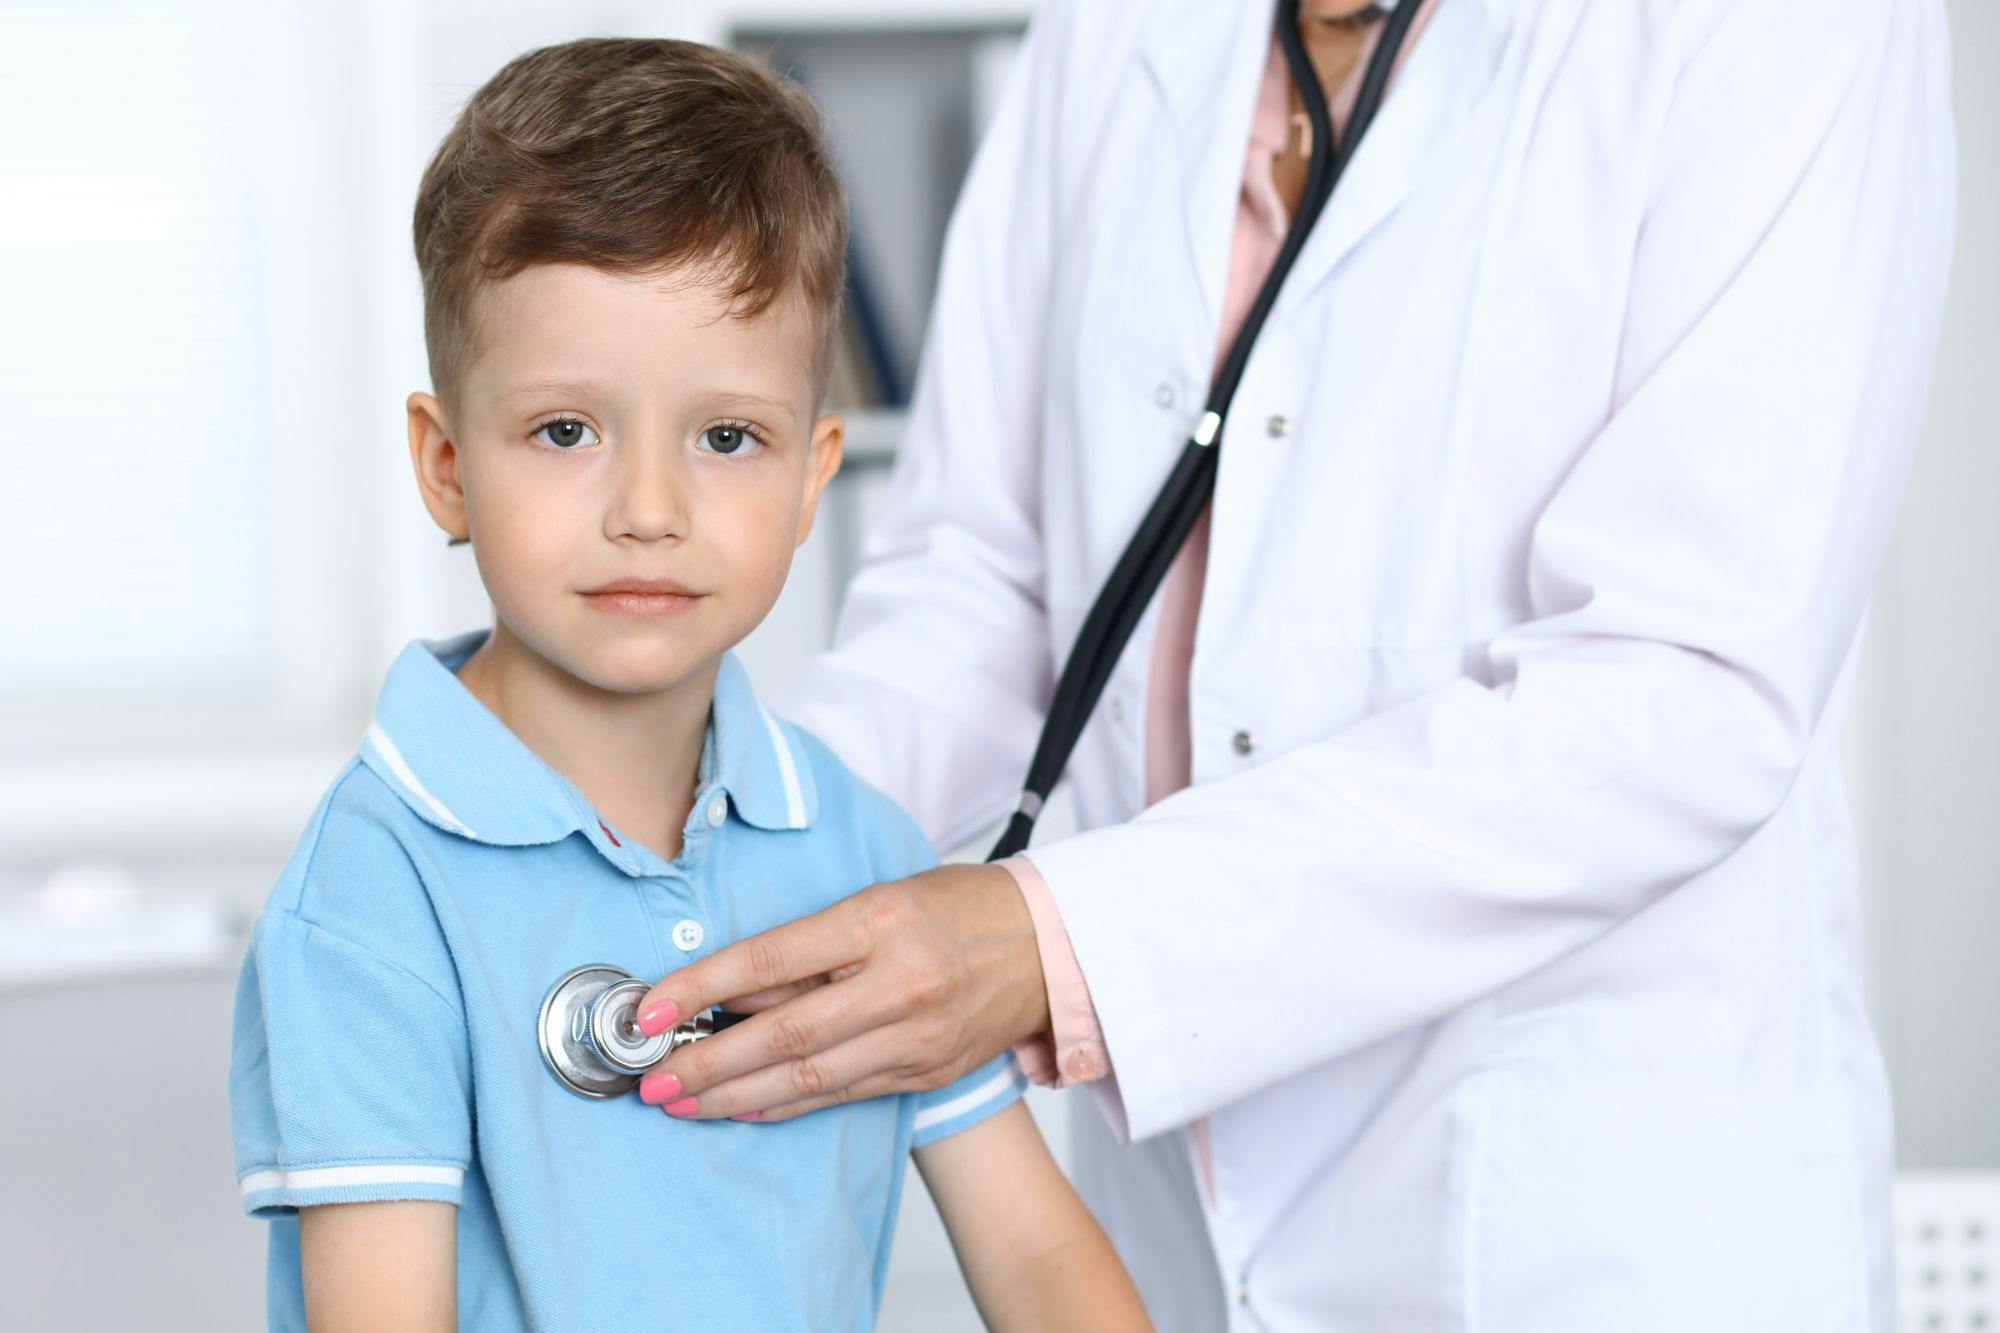 Young boy at doctor's